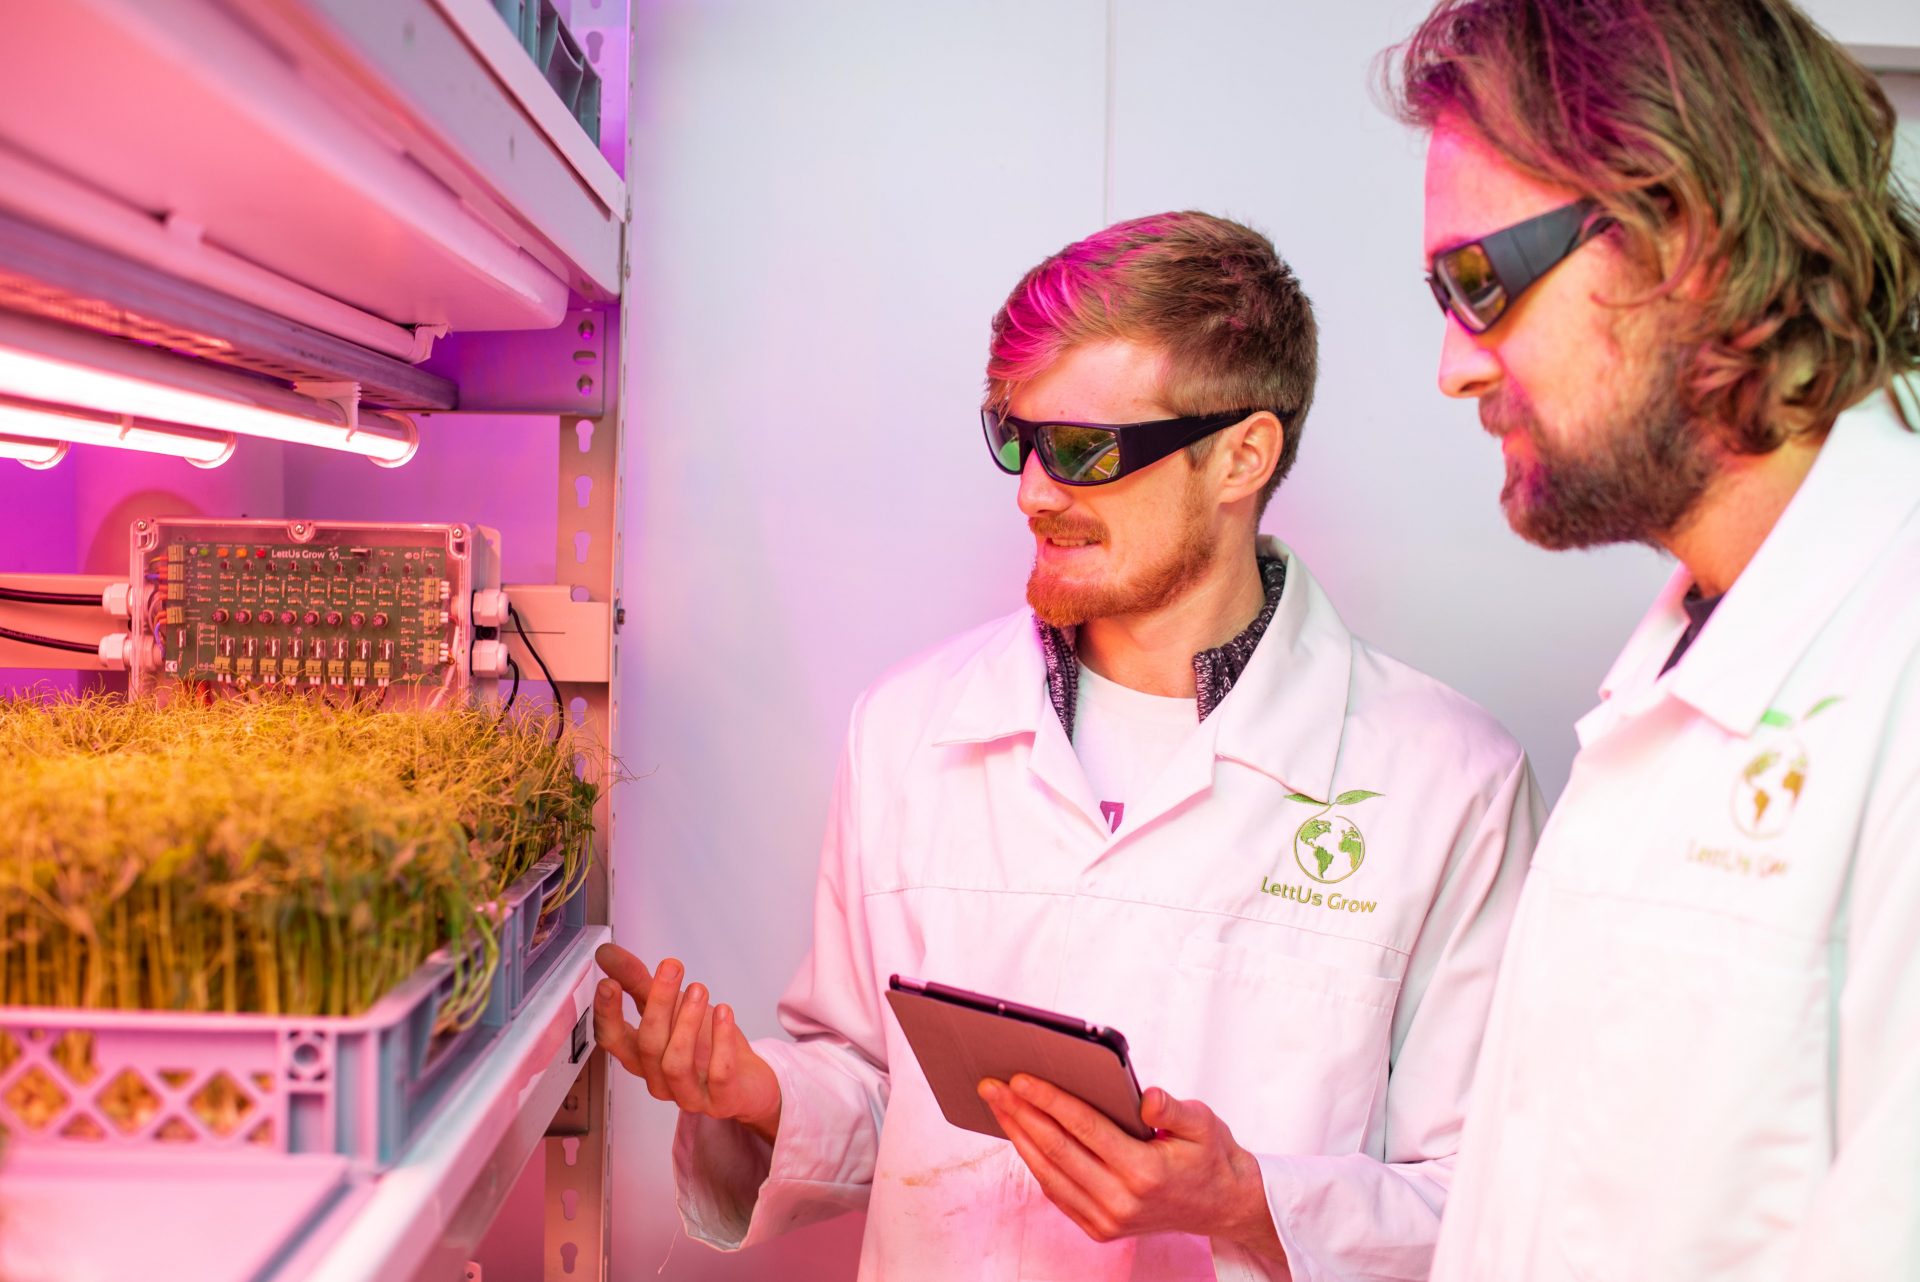 Jack Farmer, LettUs Grow Co-Founder & Chief Scientific Officer (left), and Charlie Guy, Co-Founder & CEO, inspect pea shoot crops in LettUs Grow's aeroponic research centre